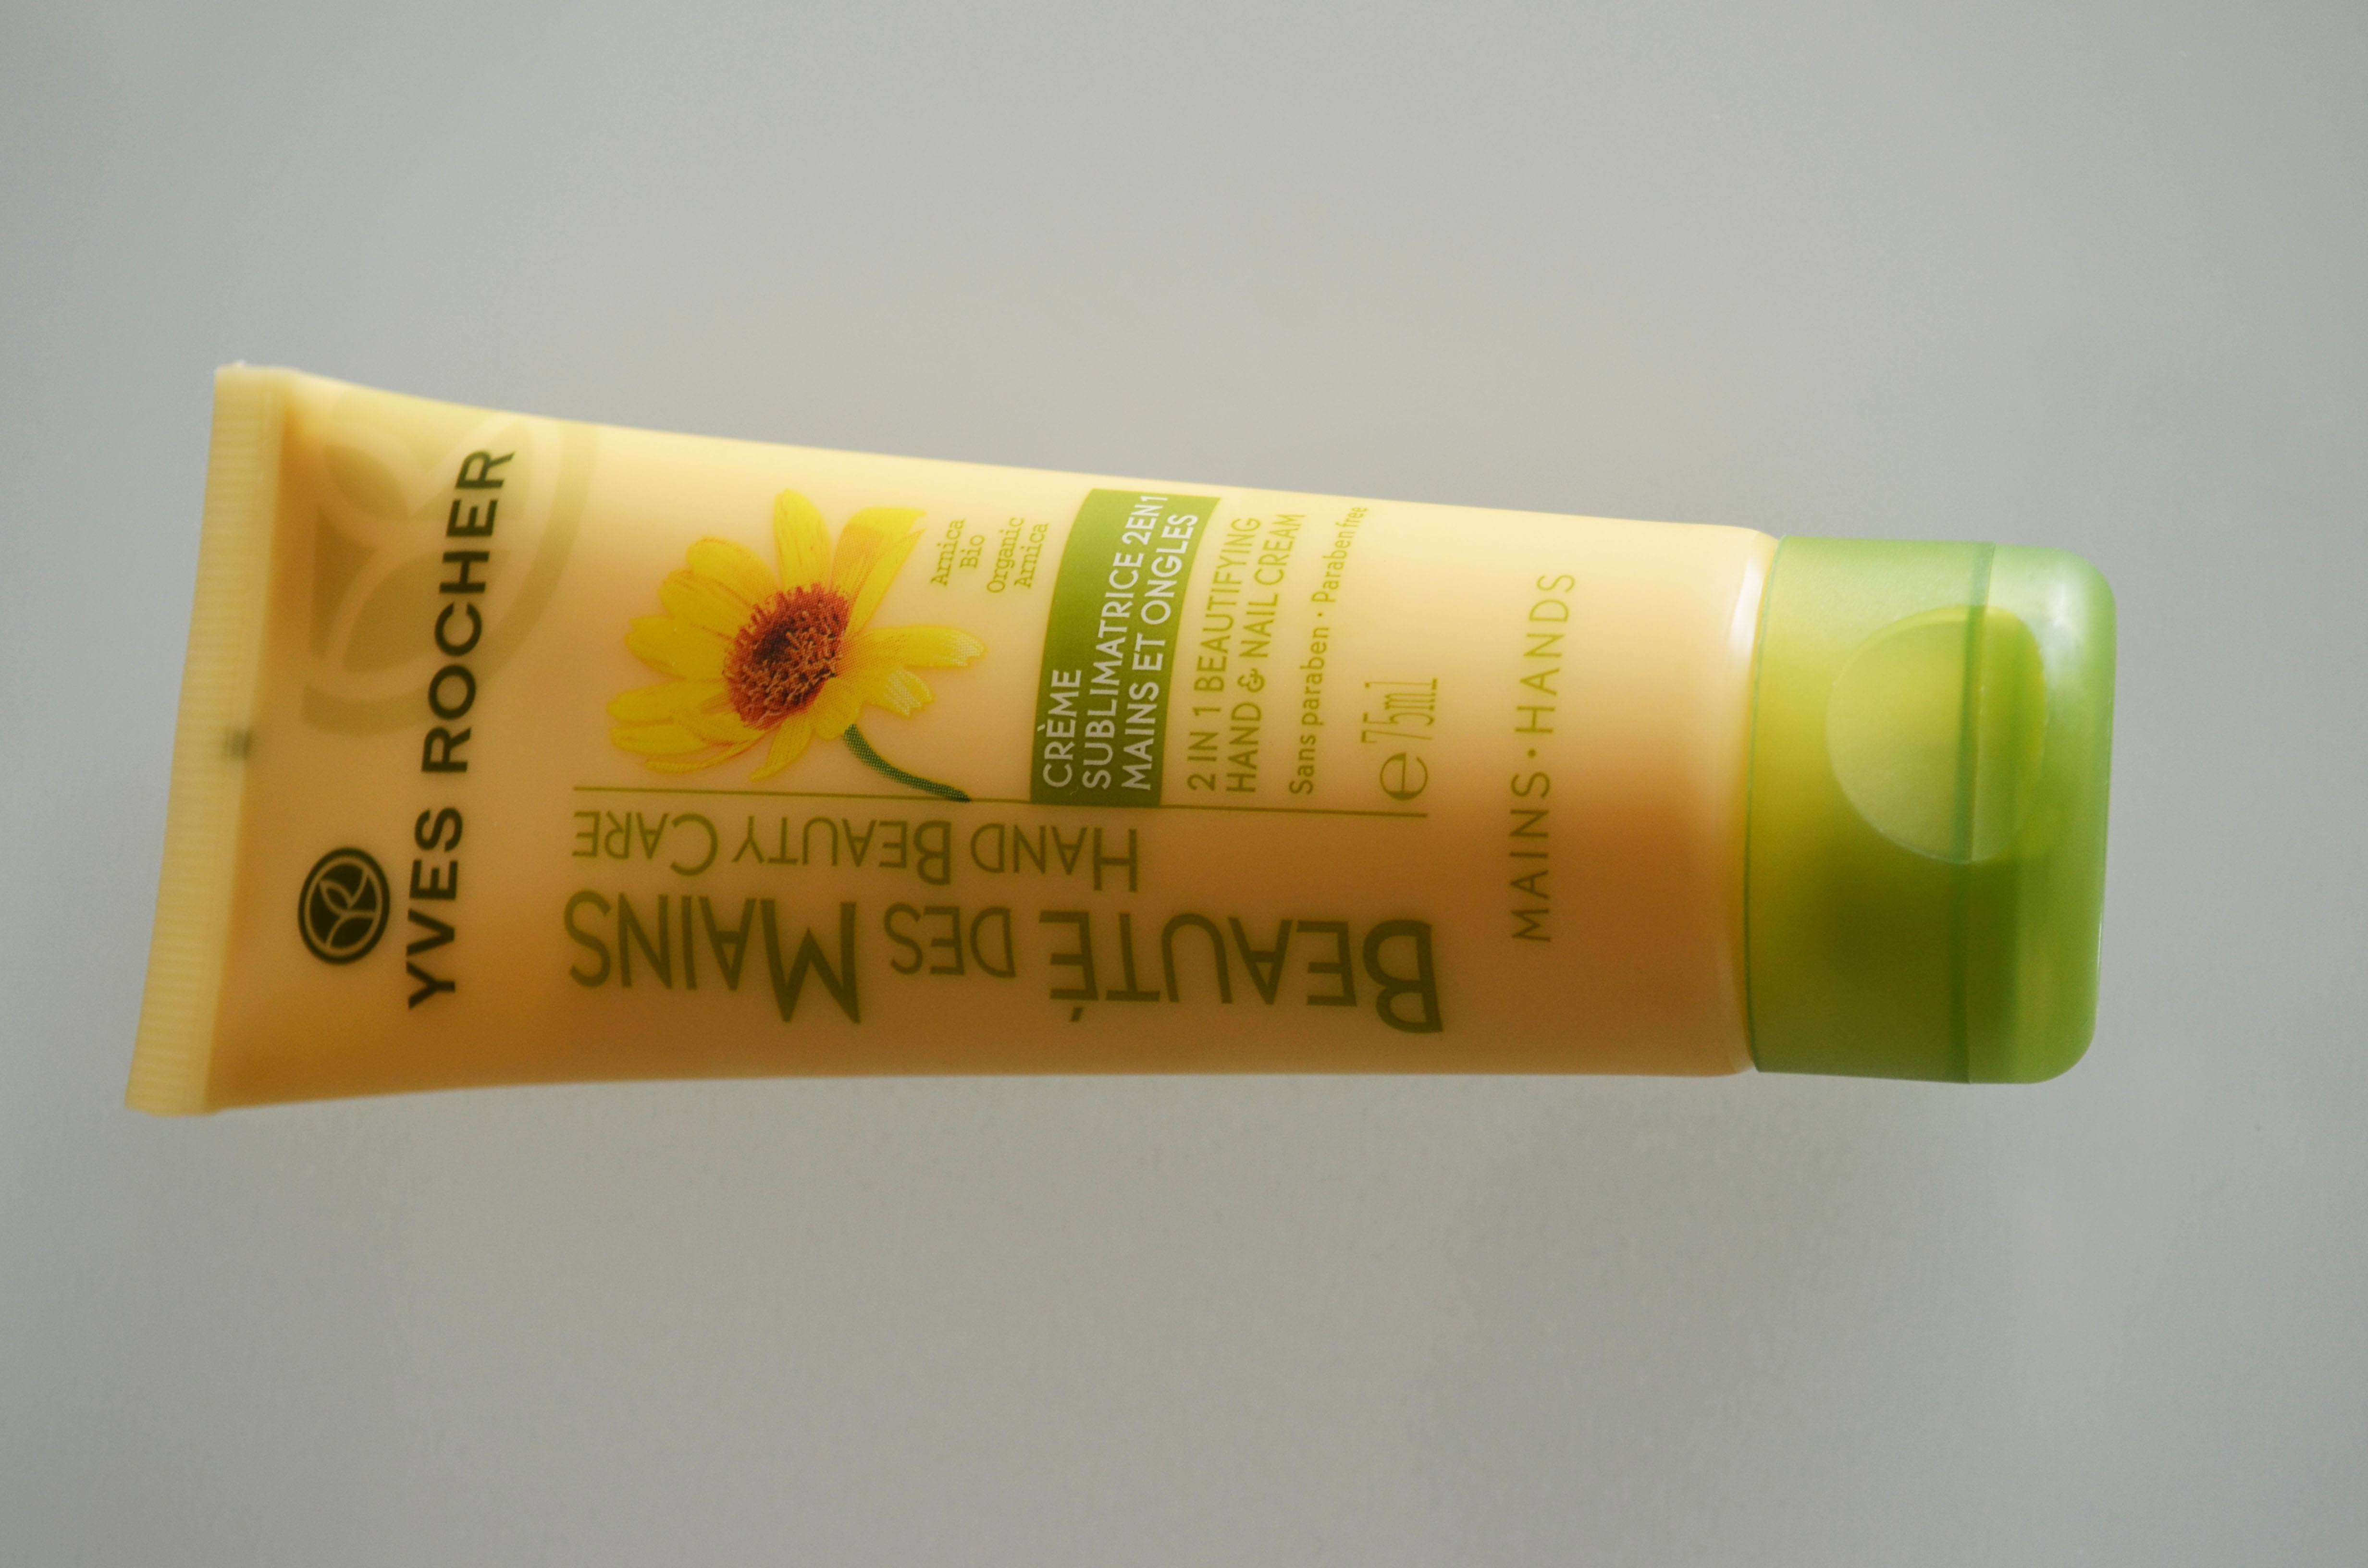 Yves Rocher 2 in 1 Beautifying Hand and Nail Cream Review